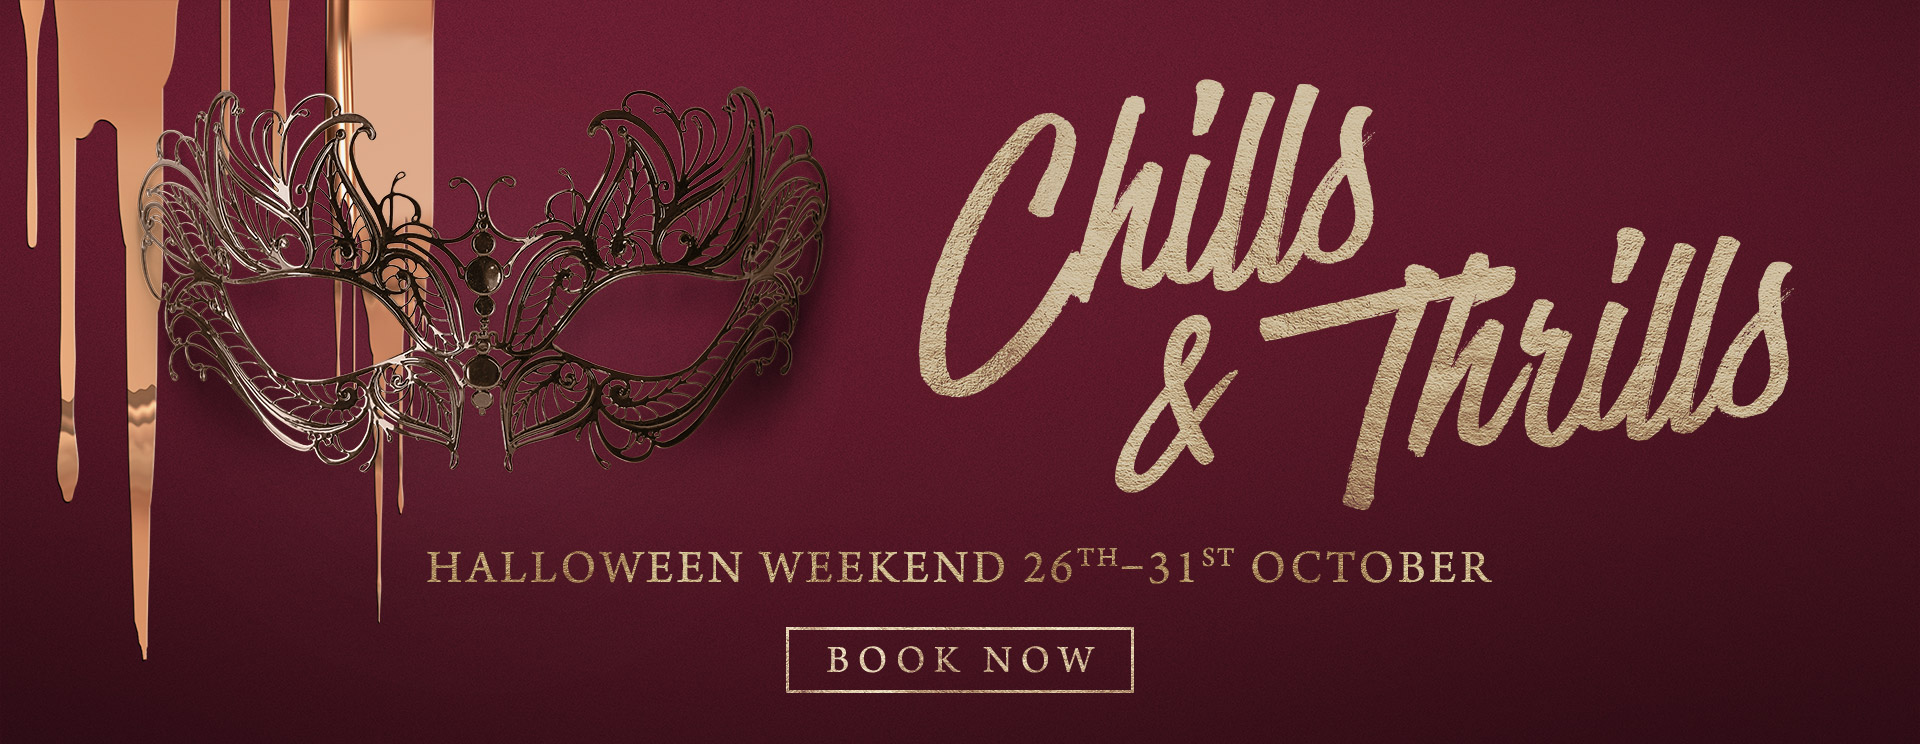 Chills & Thrills this Halloween at The Cliff